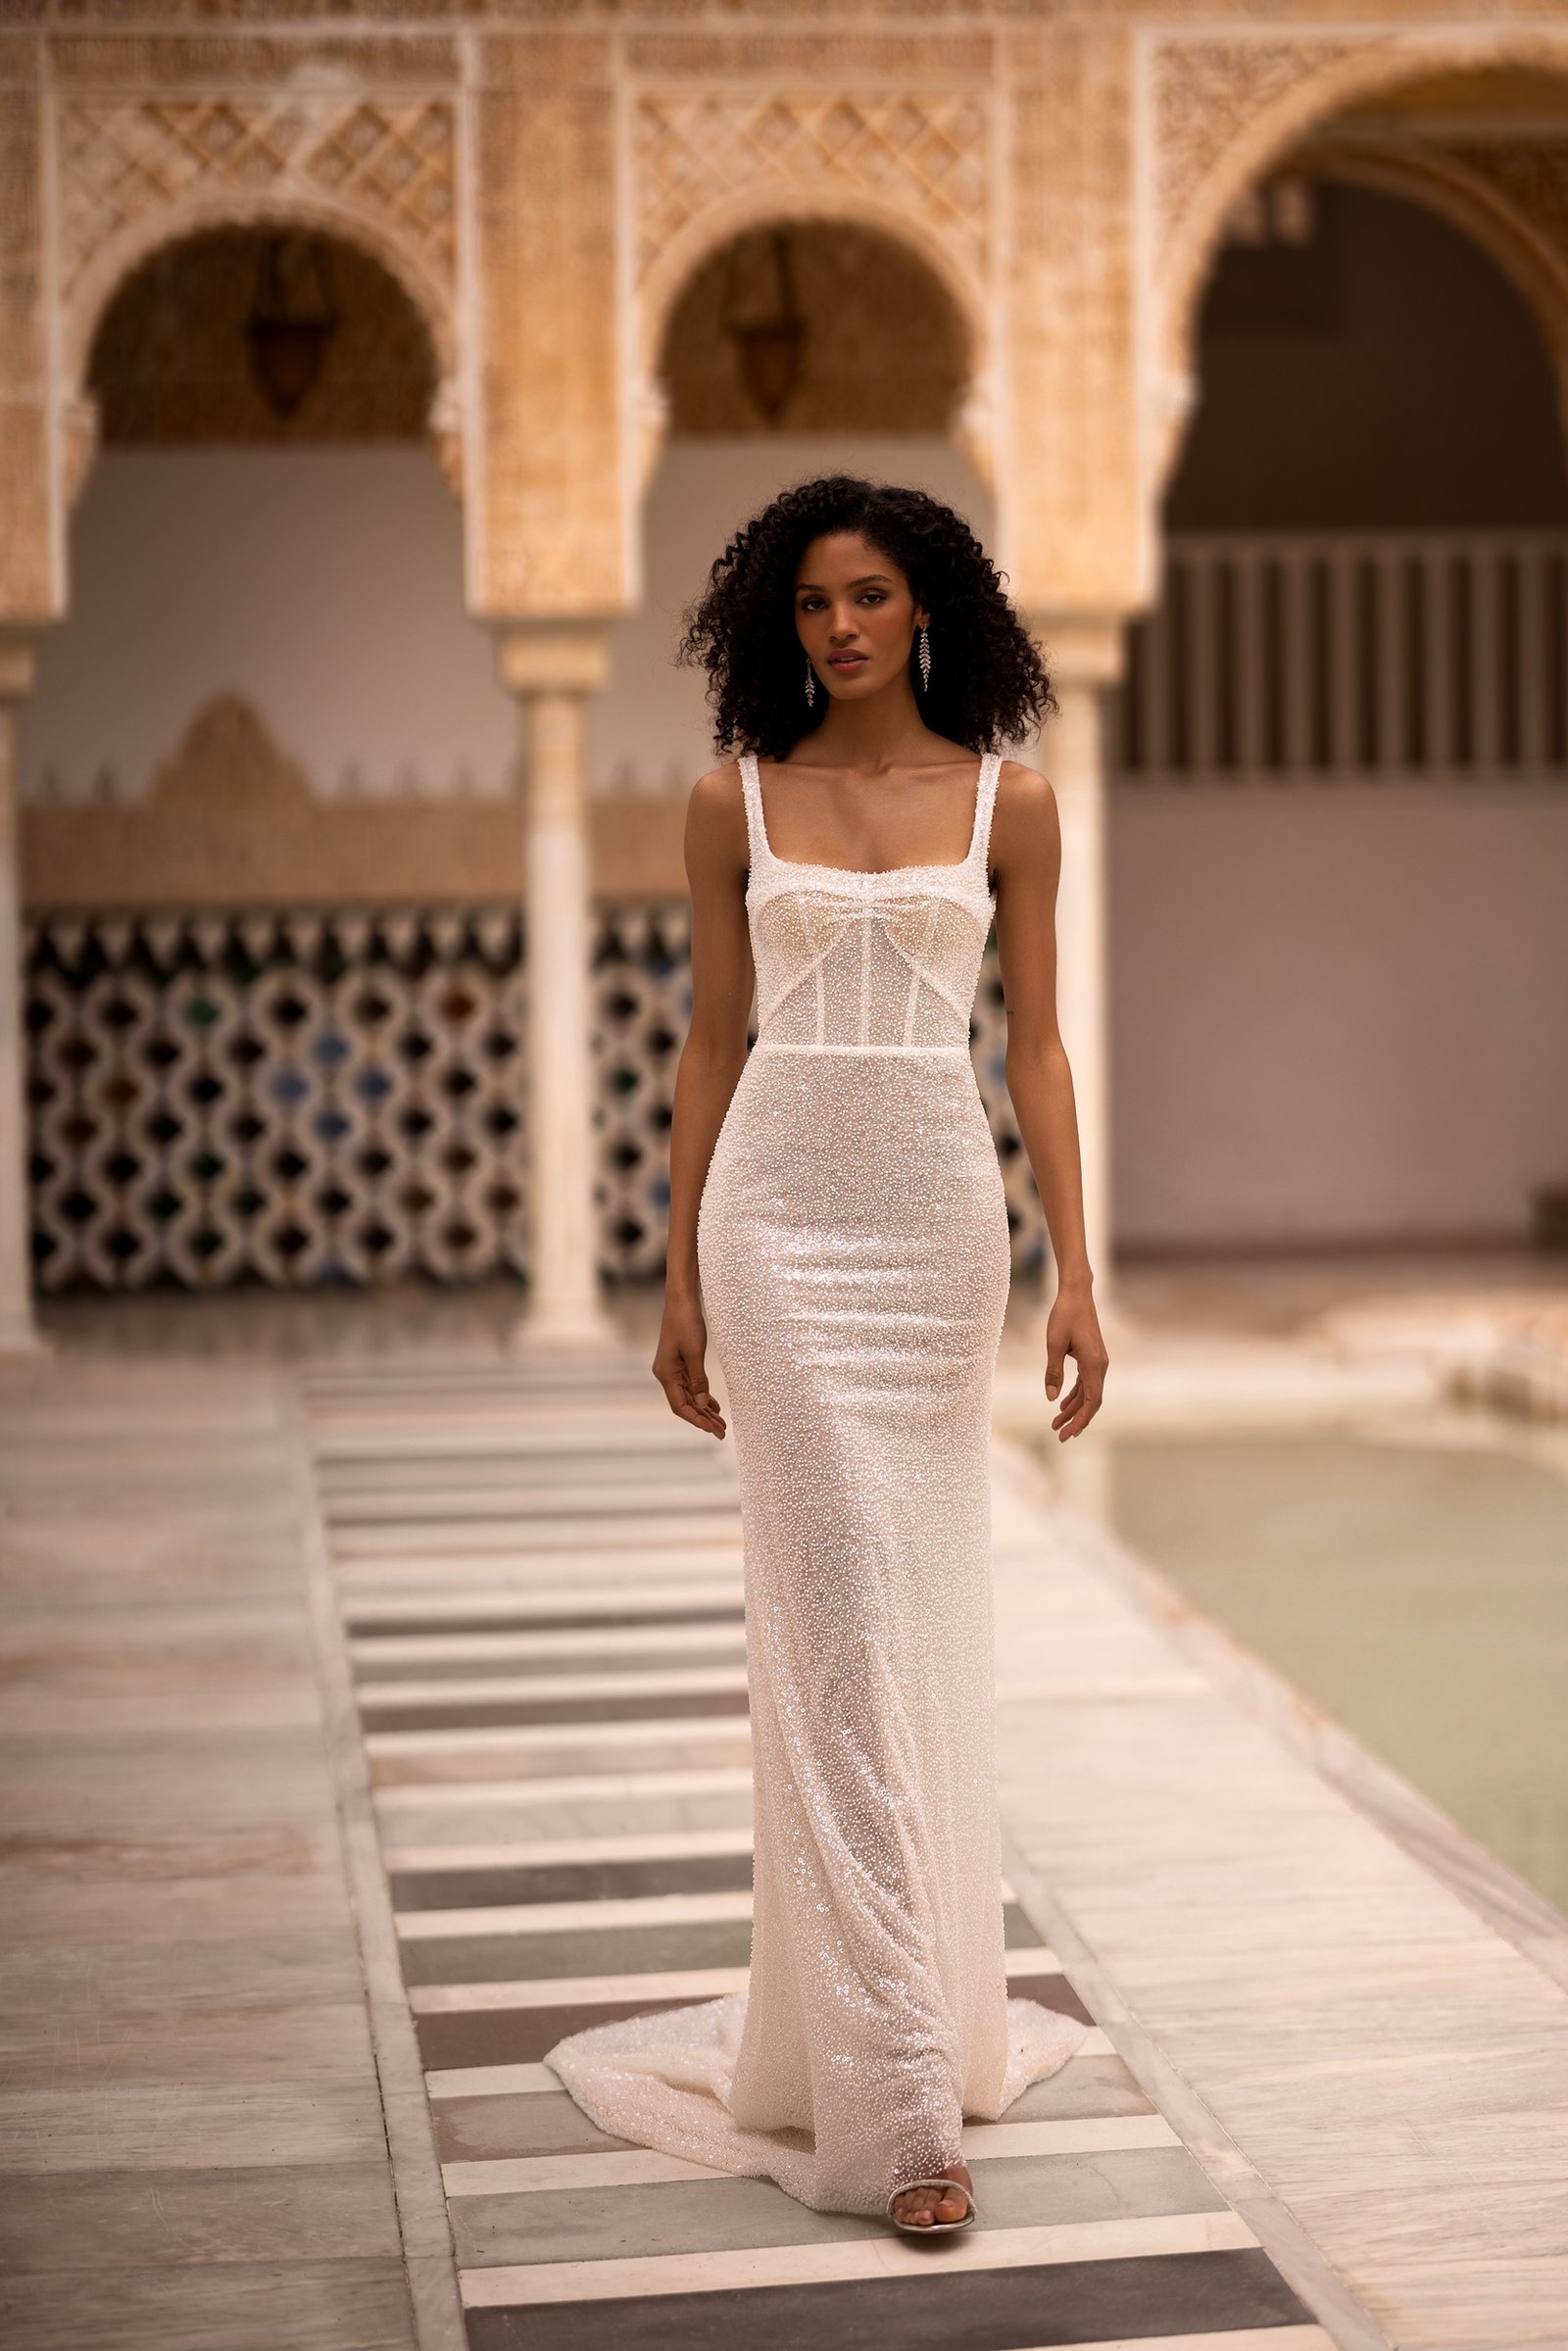 Electra 5 dress by wona concept from alma de oro collection